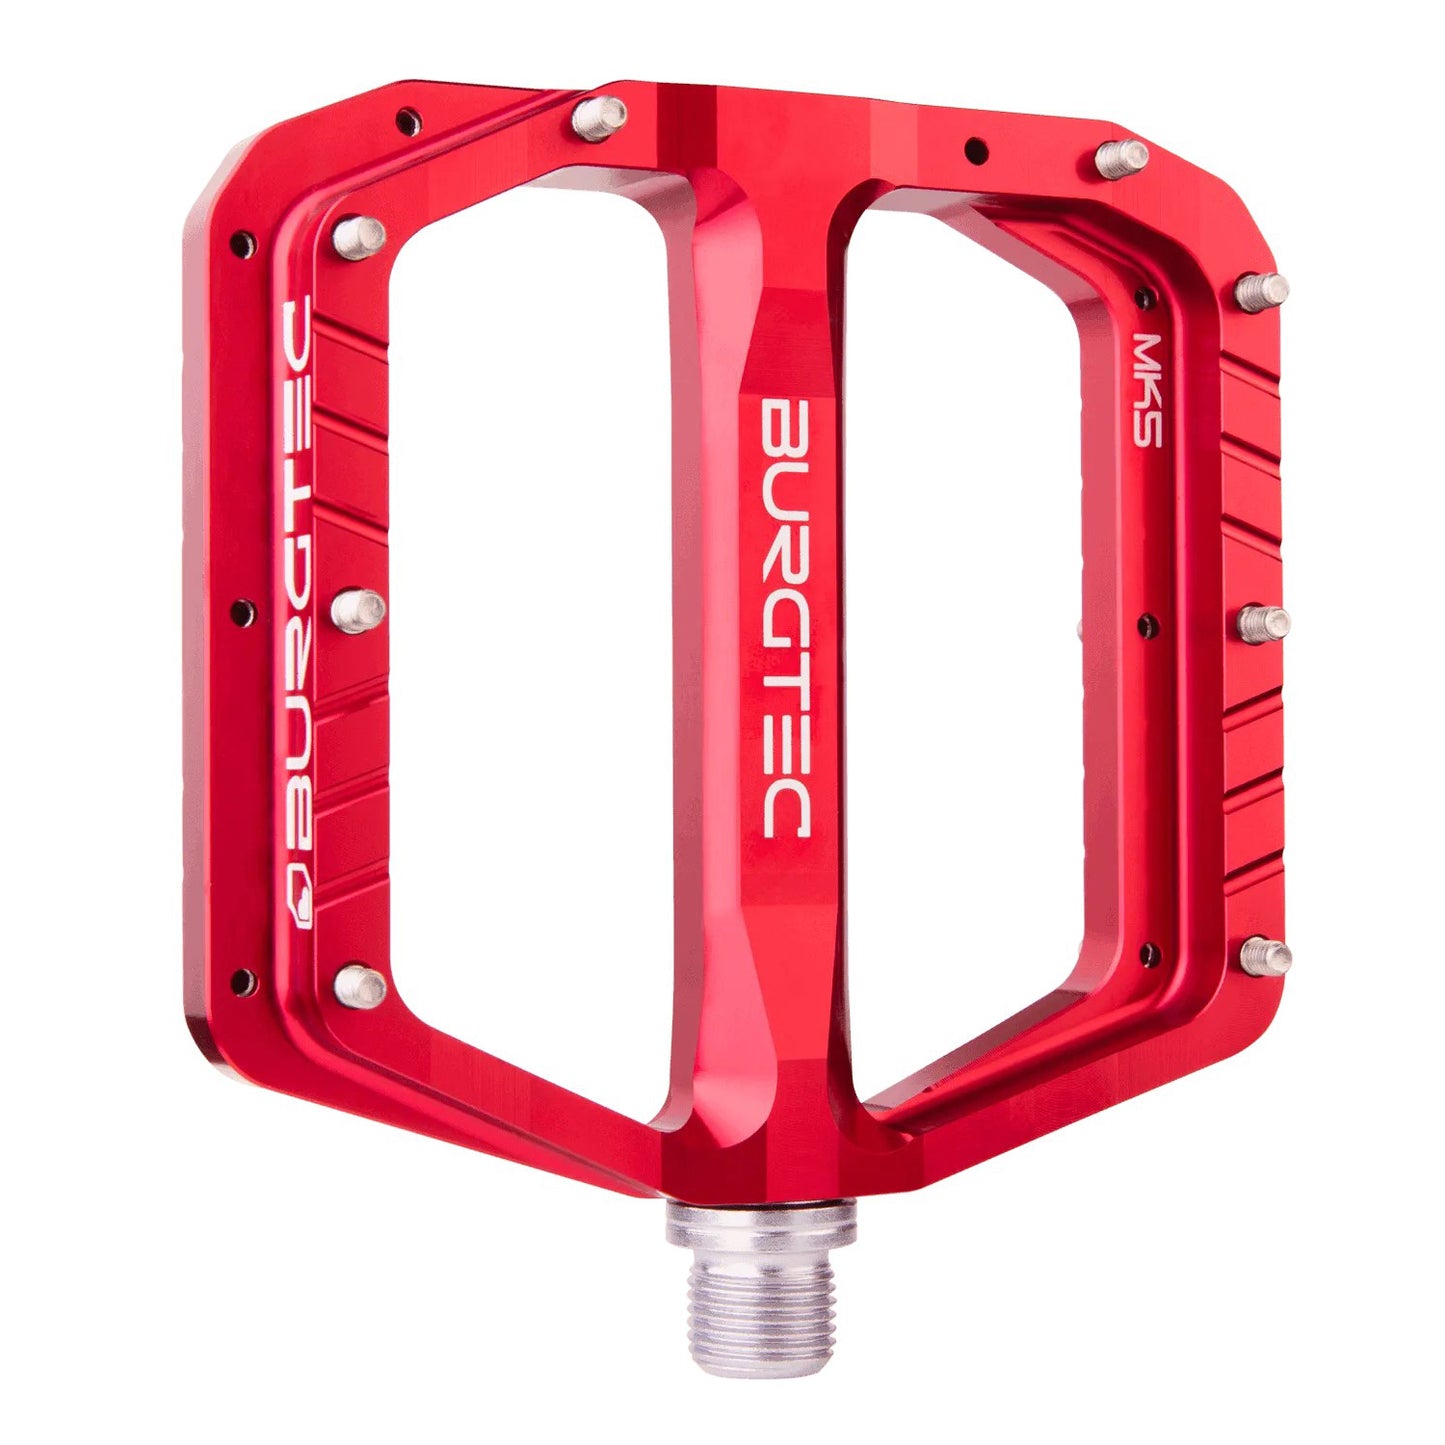 Burgtec Penthouse MK5 Steel Axle Alloy Flat Pedals - Race Red